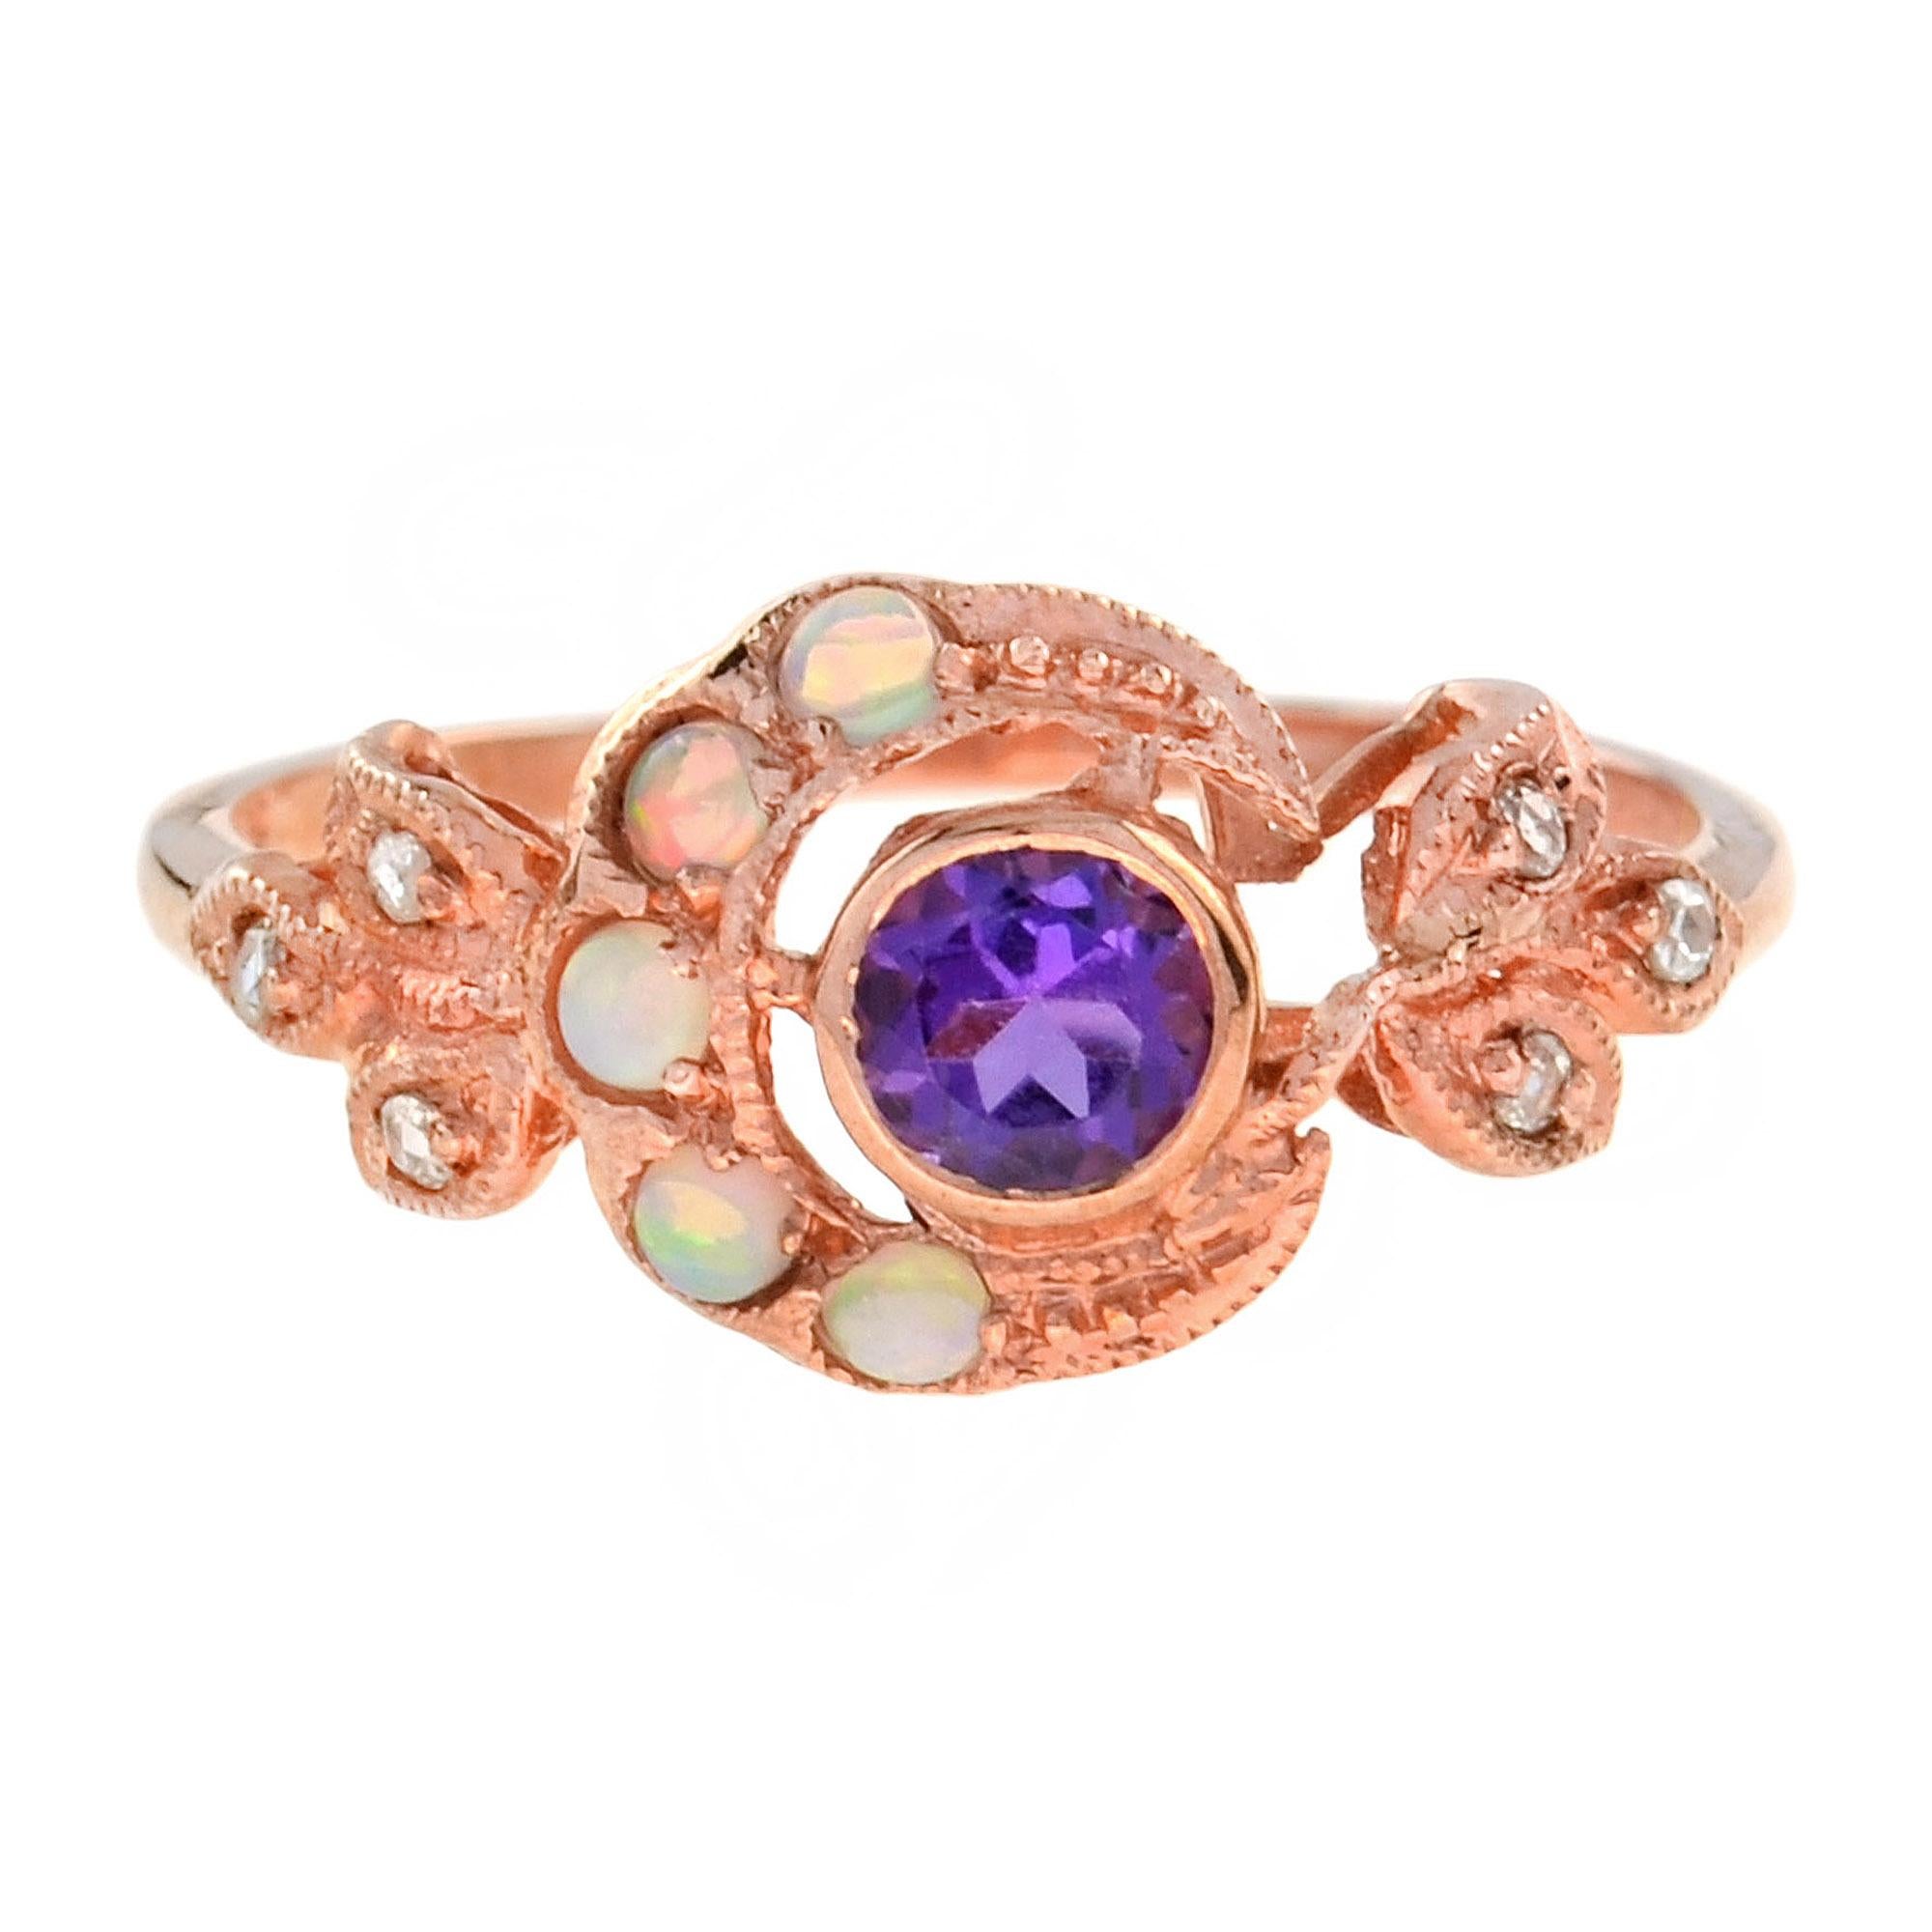 A stunning 9K rose gold Victorian Era ring, featuring an Amethyst adorned with opal and diamonds on shoulders.  

Ring Information
Style: Victorian 
Metal: 9K Rose Gold
Weight: 1.61 g.(approx.)

Center Gemstones
Type: Amethyst
Shape: Round
Size: 4